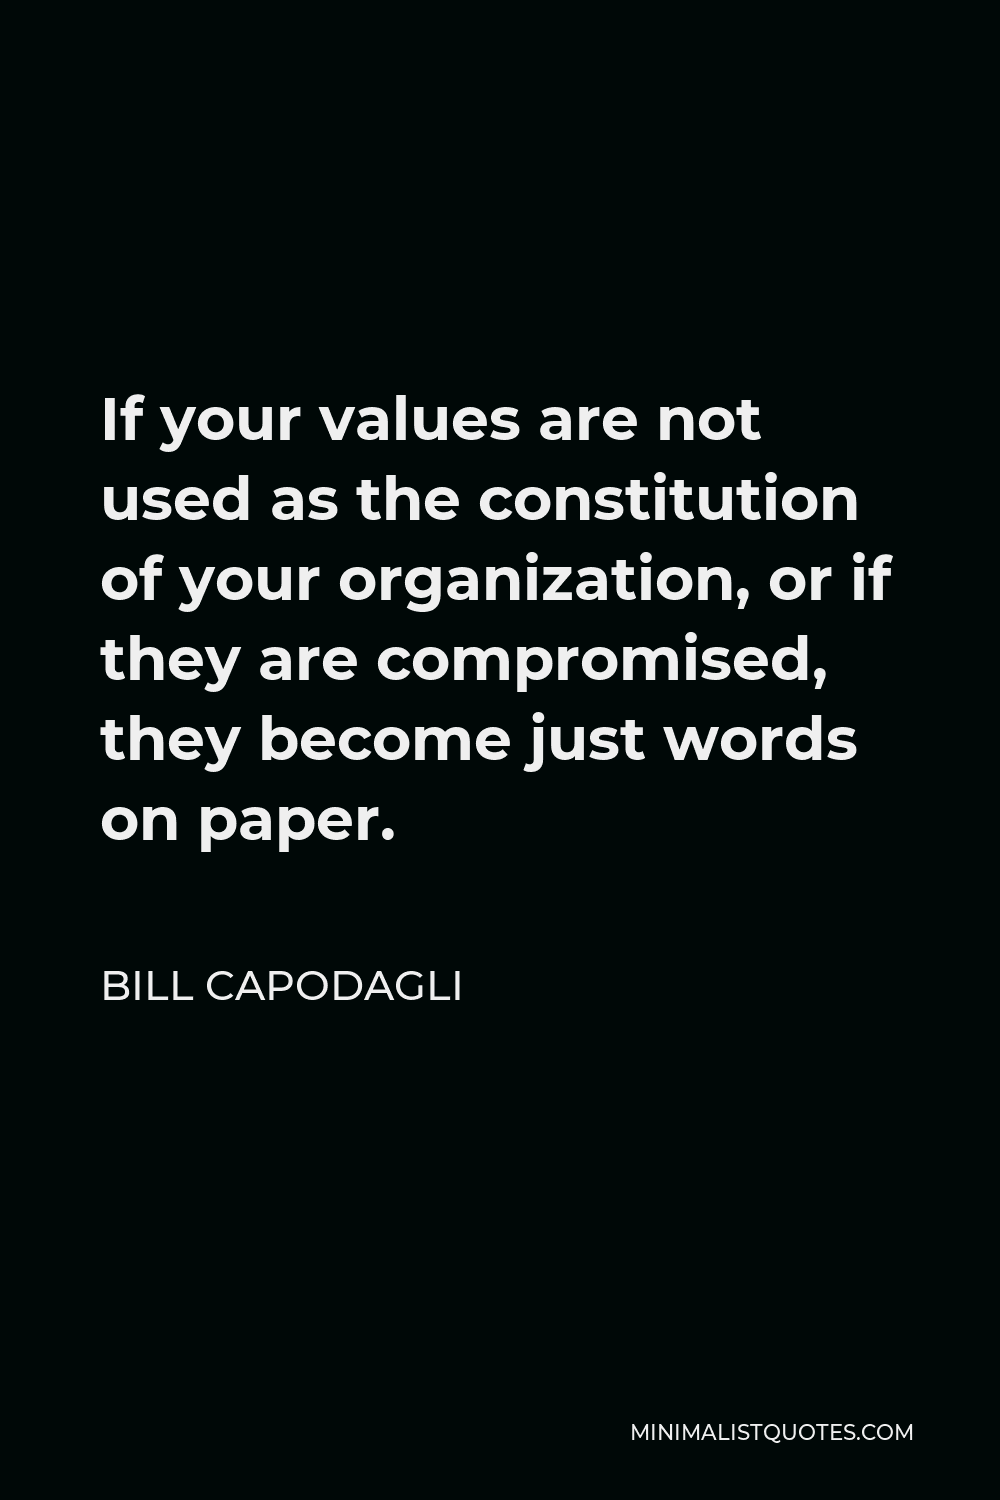 Bill Capodagli Quote - If your values are not used as the constitution of your organization, or if they are compromised, they become just words on paper.